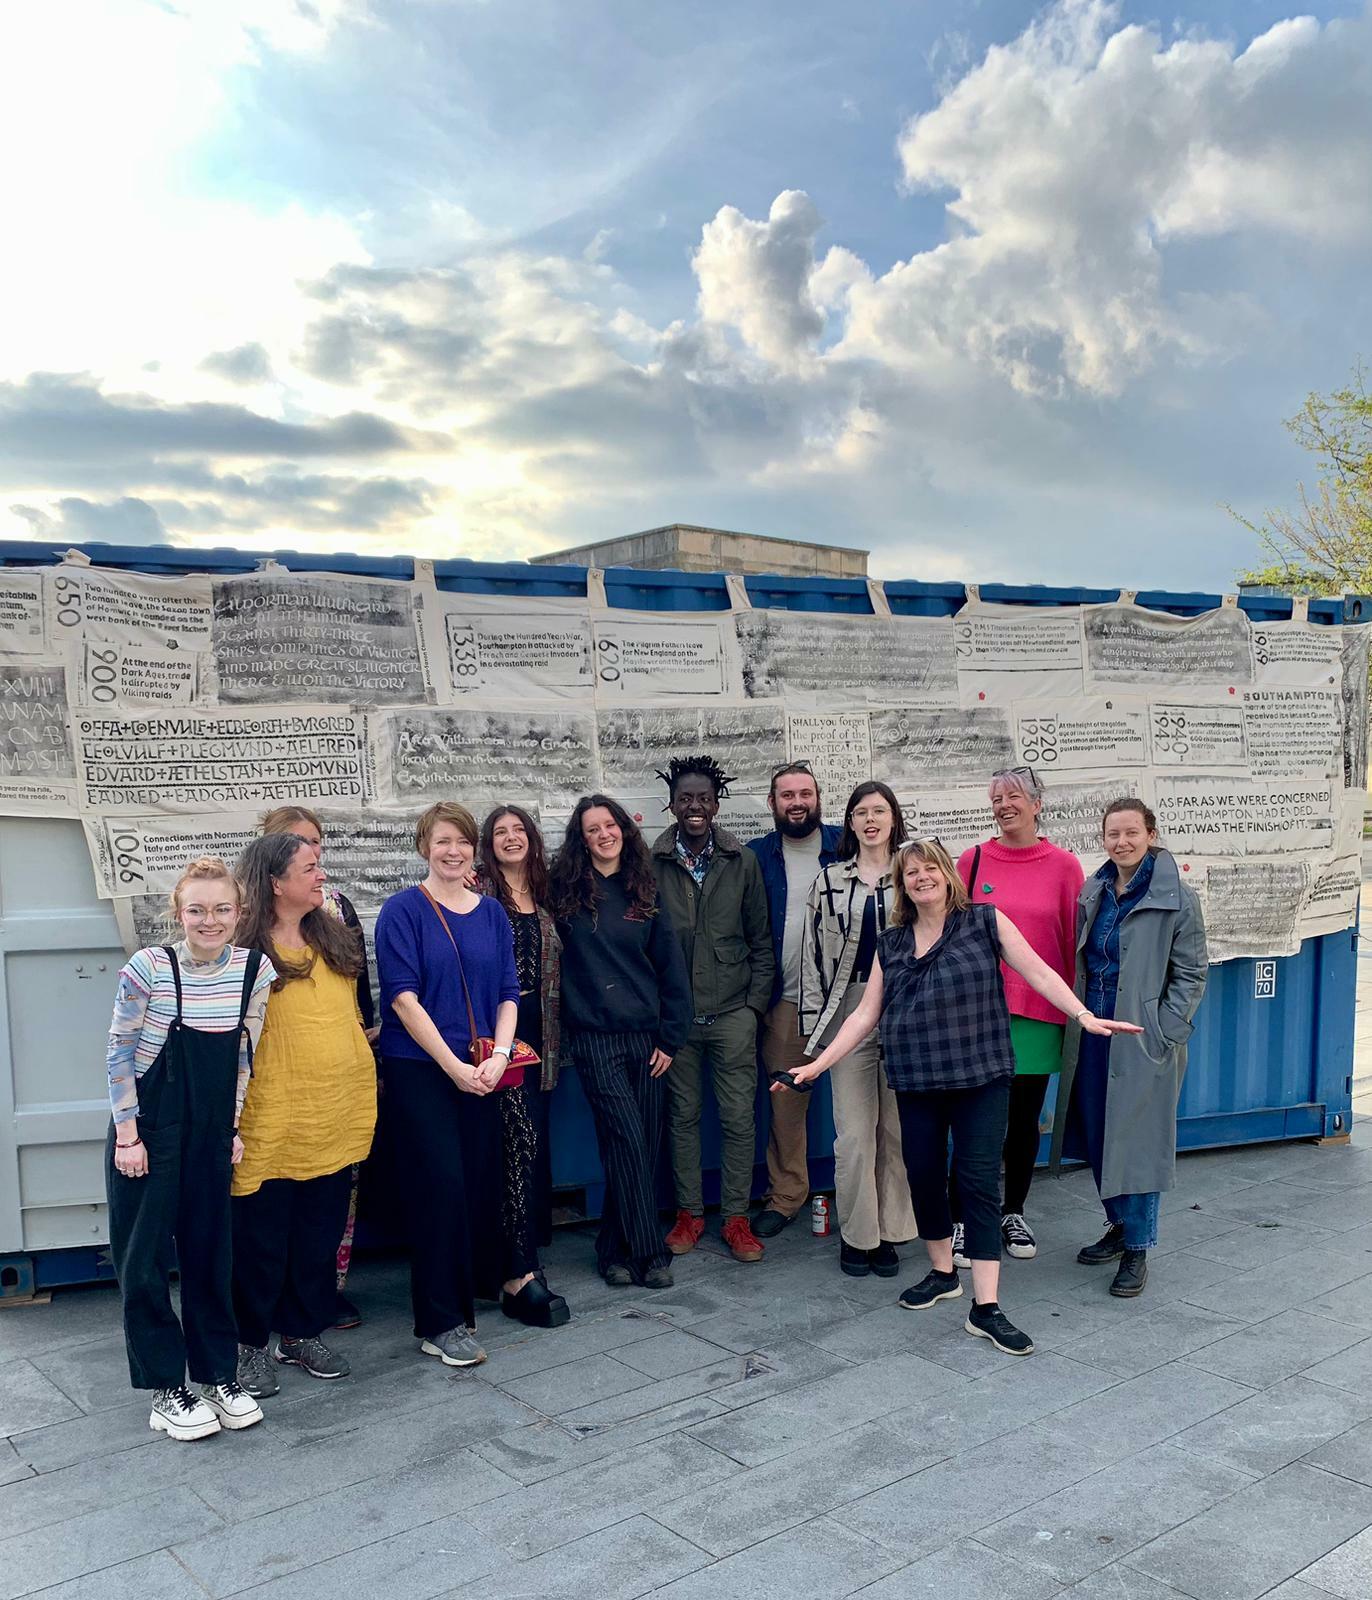 A group photograph of people smiling for the camera, stood in front of a shipping container that has printed fabric hung on its side